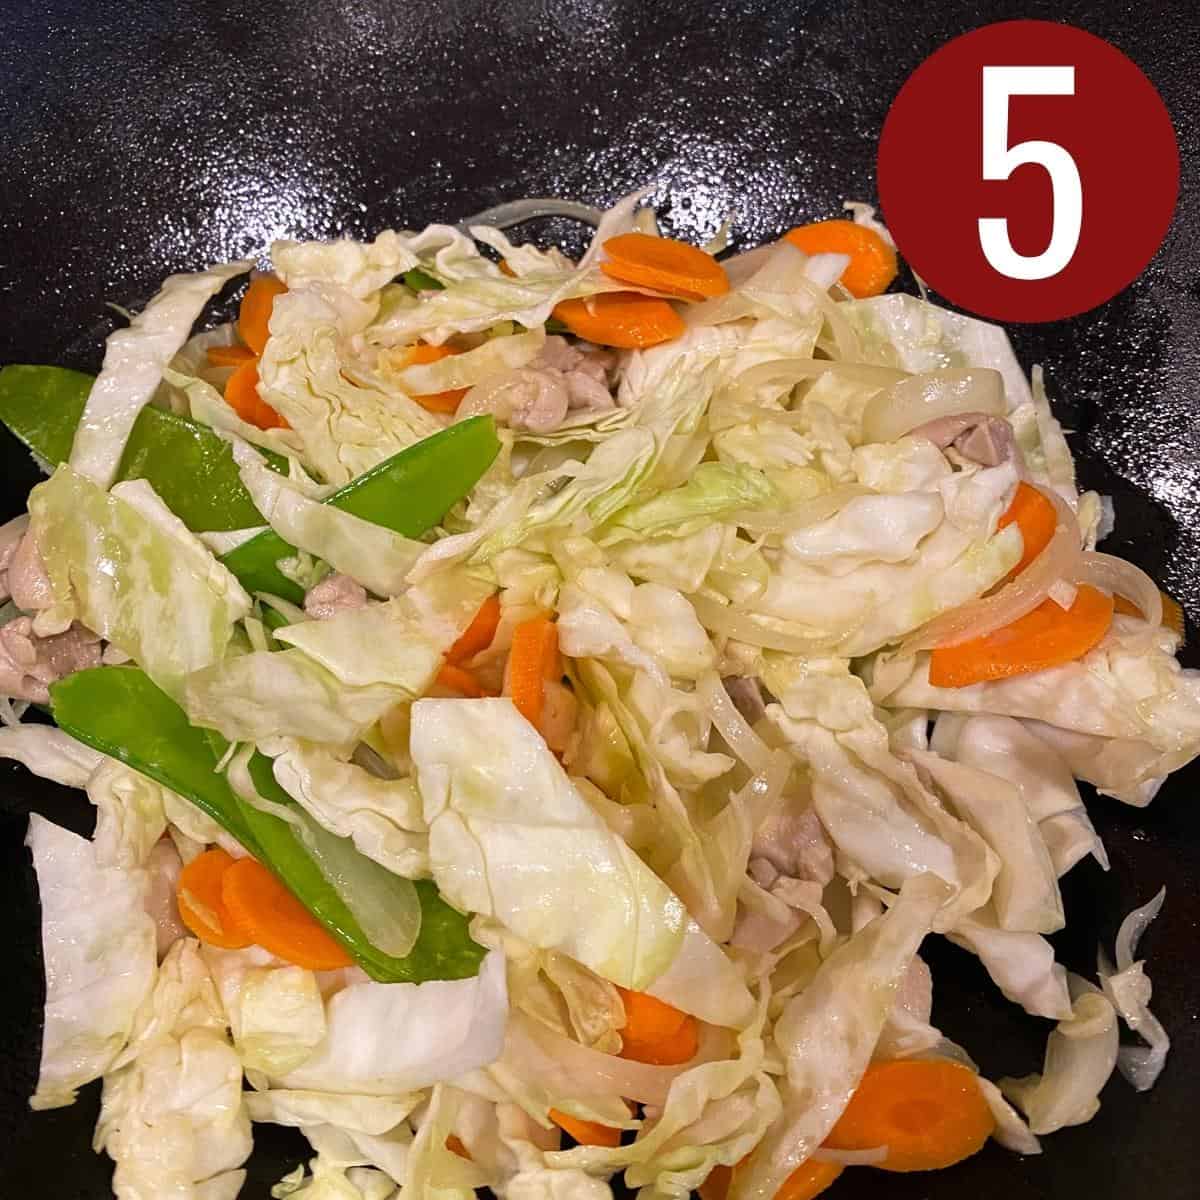 Cabbage, pea pods, carrots with chicken, garlic, and onion with oil in a skillet.